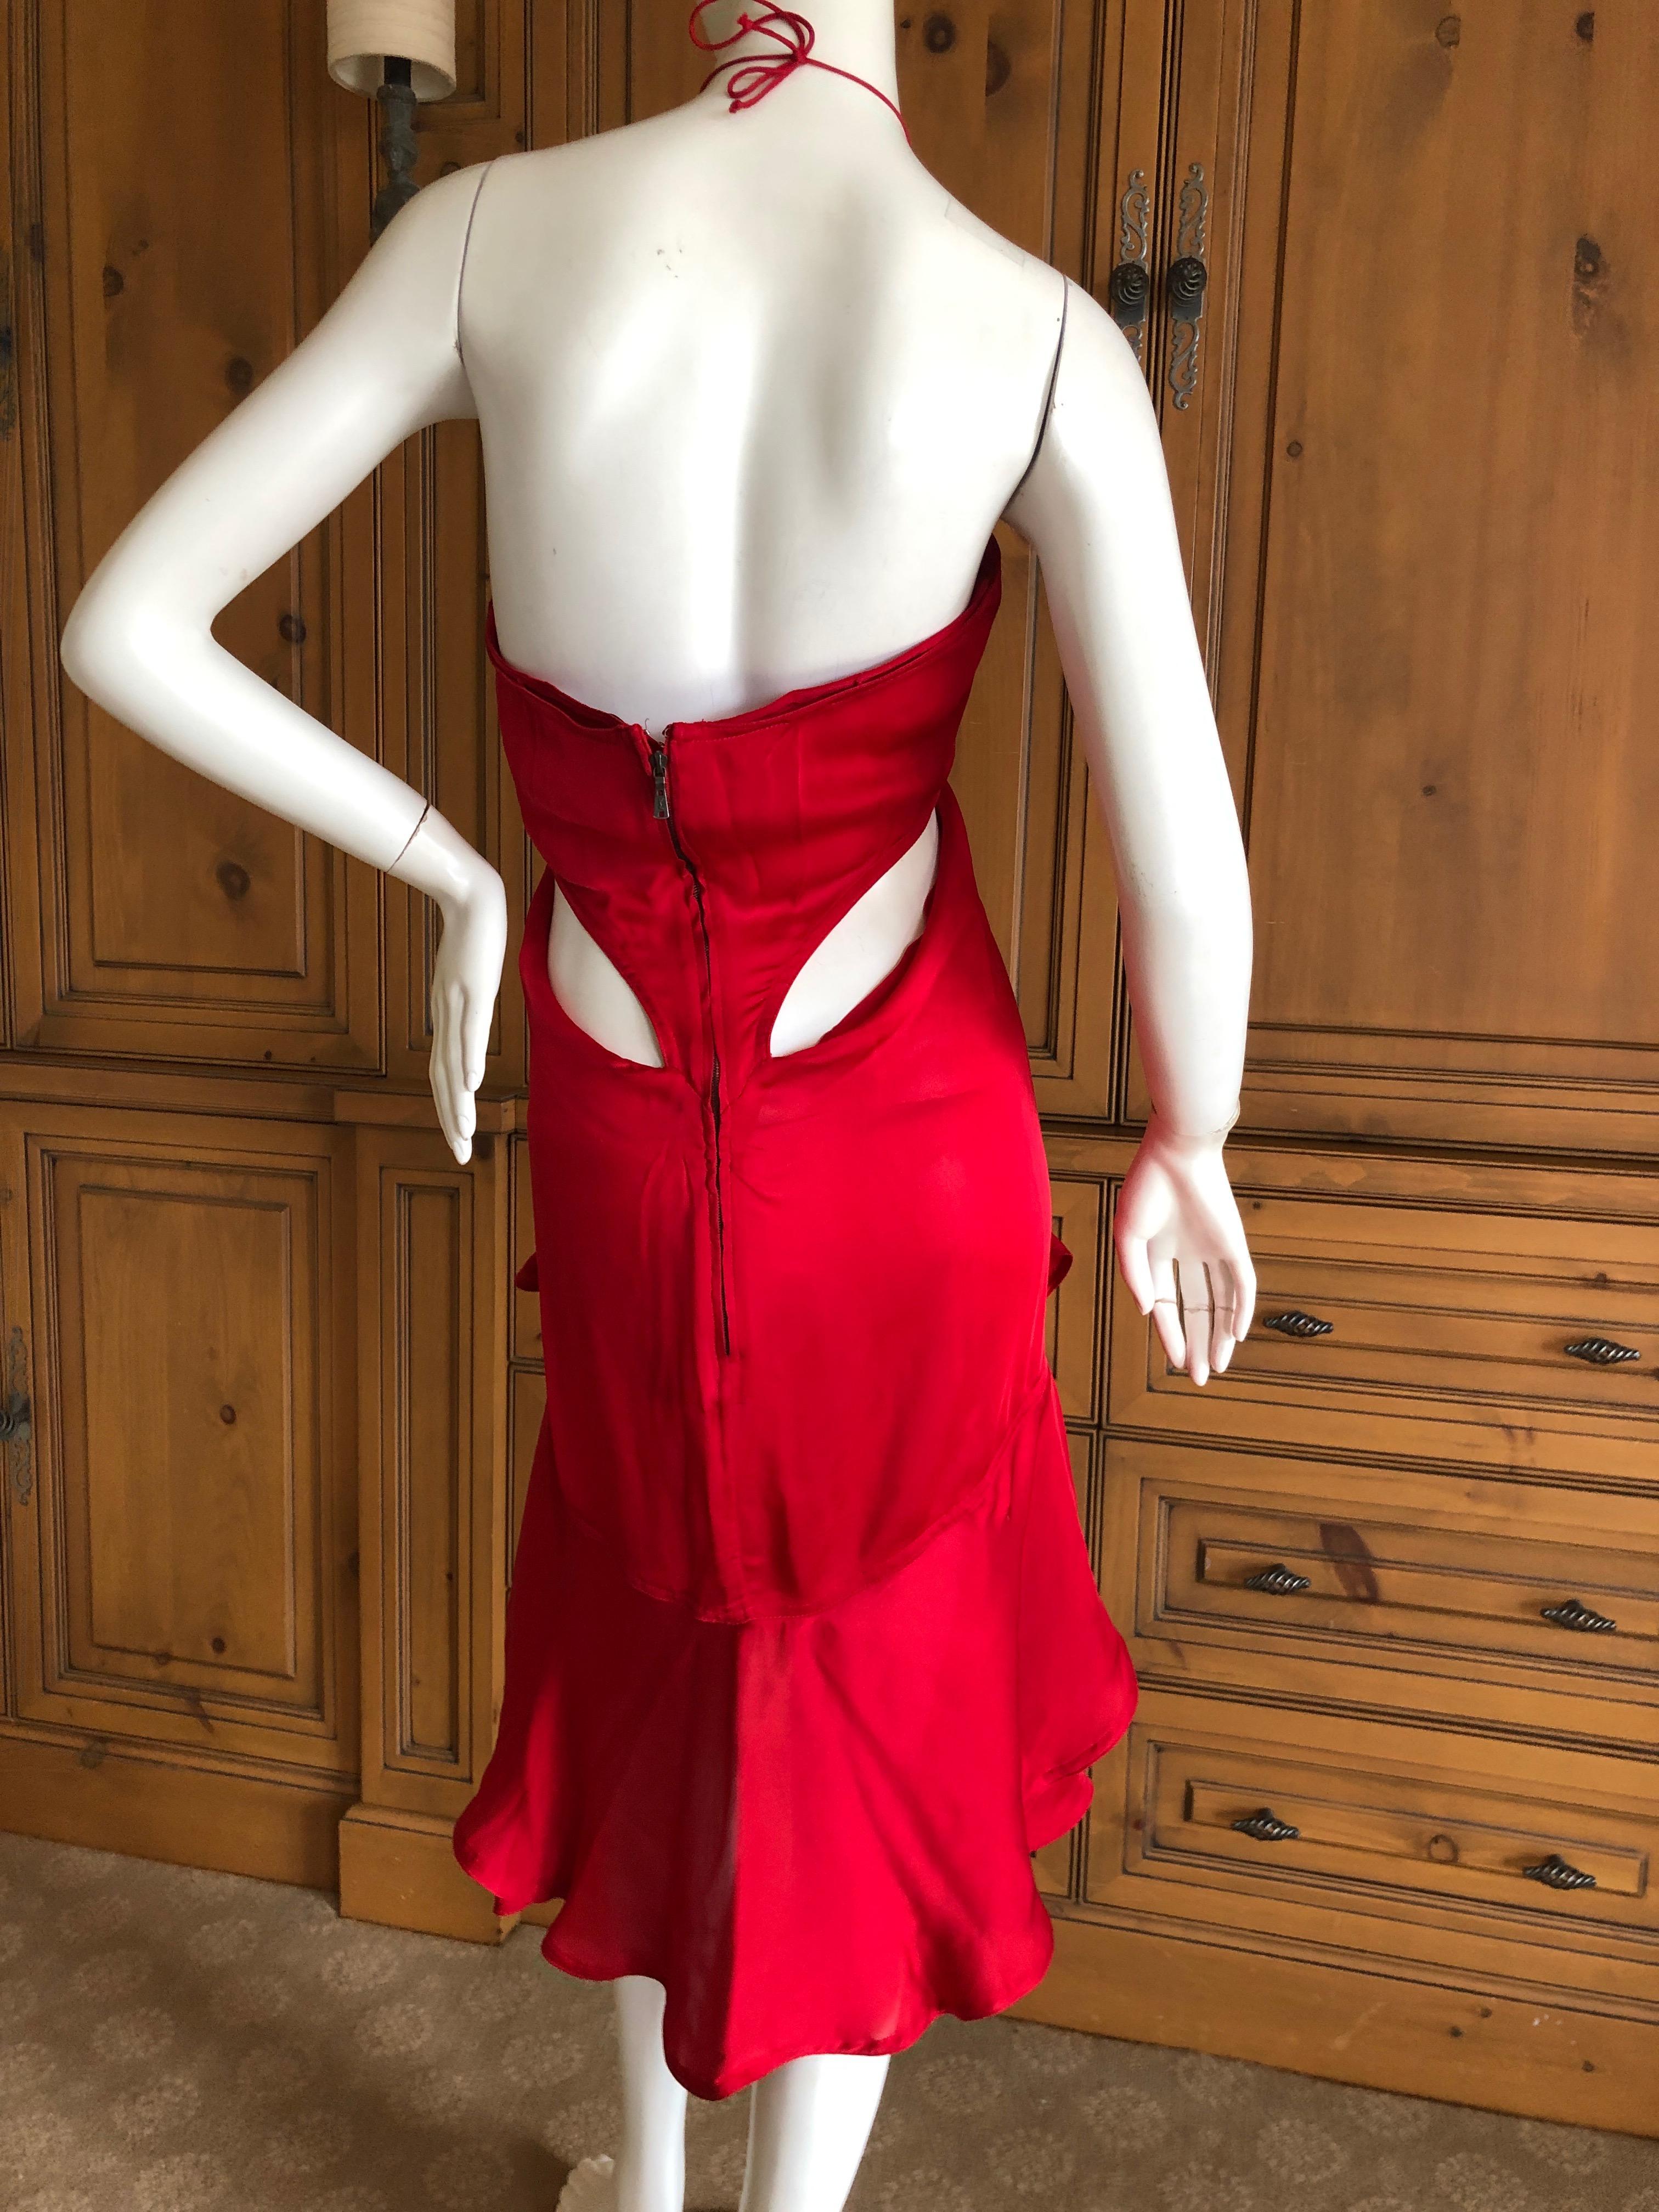 Yves Saint Laurent by Tom Ford 2003 Ruffled Red Silk Dress  For Sale 6